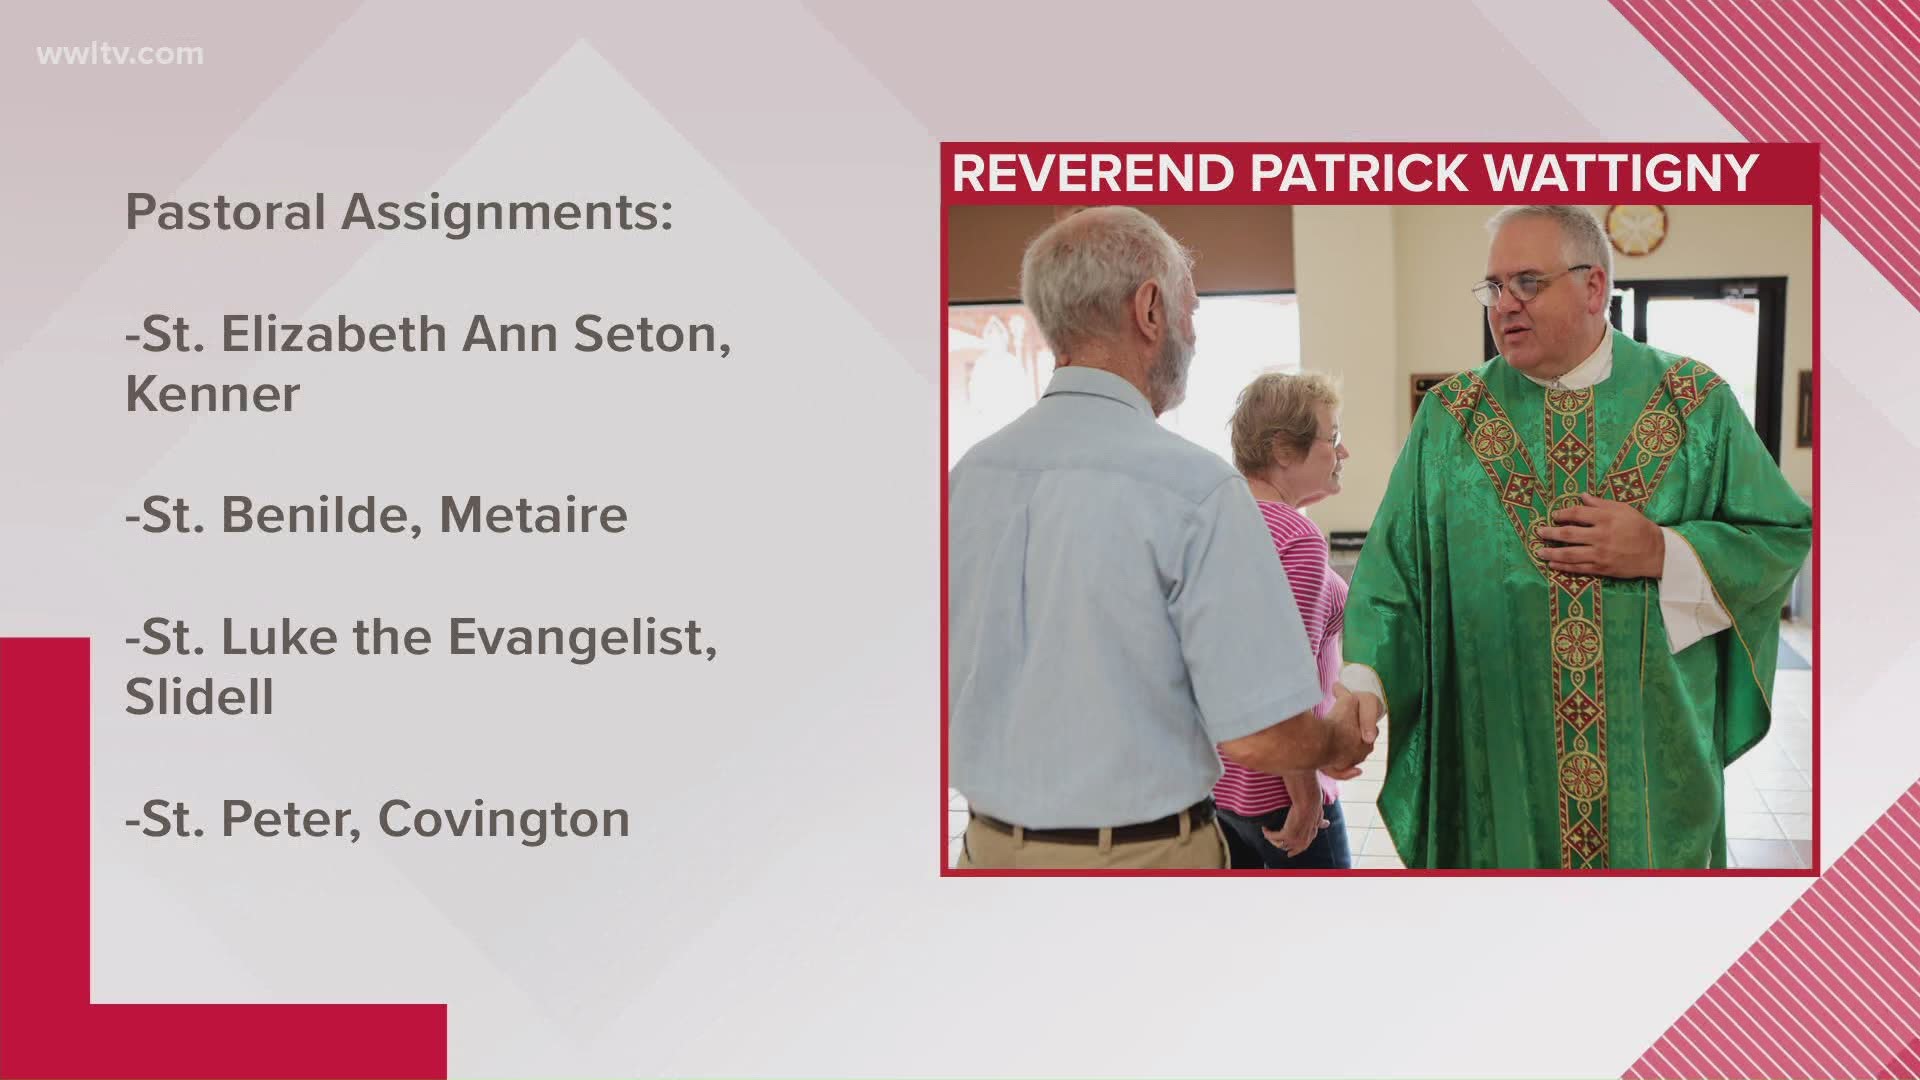 Patrick Wattigny is the latest name added to the list of priest removed from the Archdiocese, for the sexual abuse of a minor.